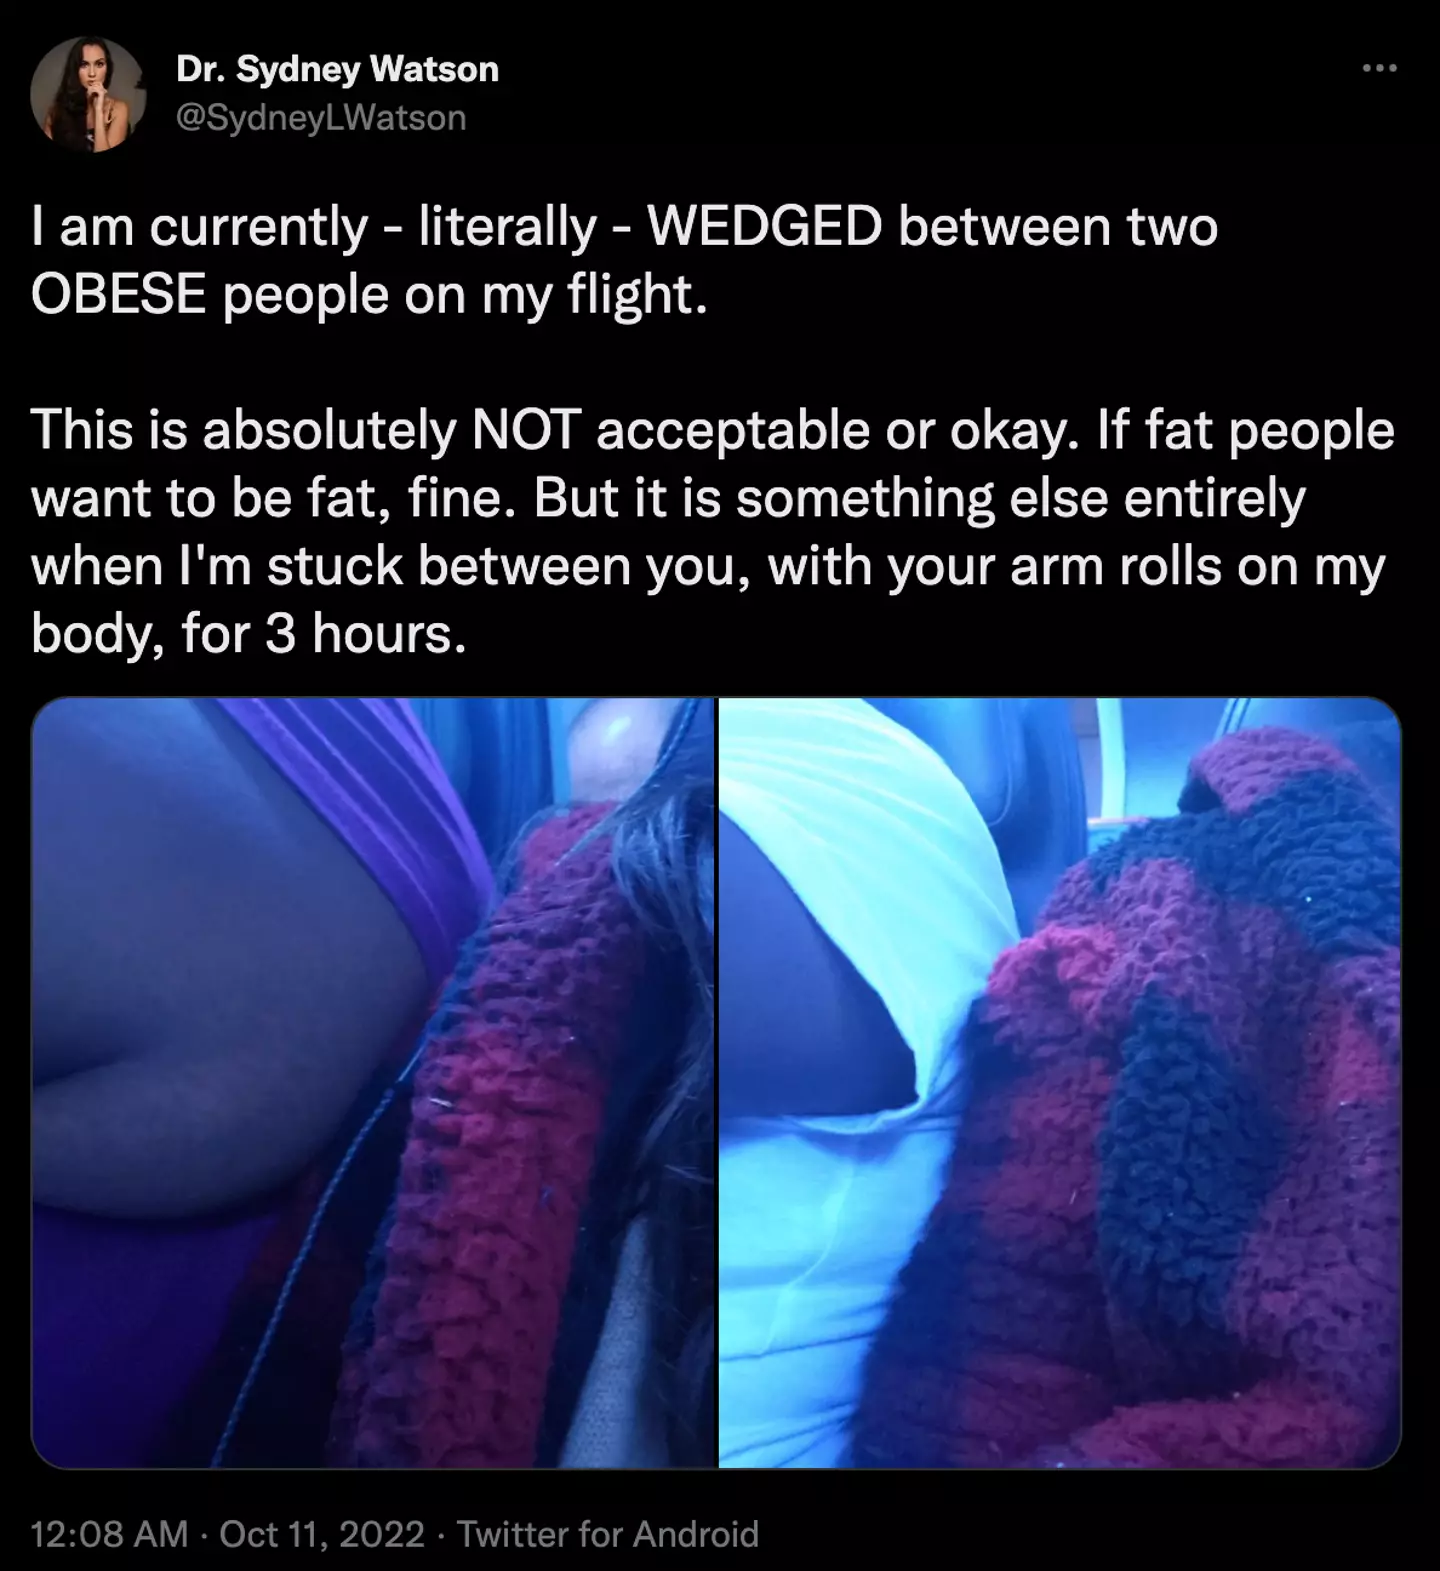 Dr Sydney Watson took to Twitter to complain about being 'wedged in between two obese people' on her American Airlines flight.